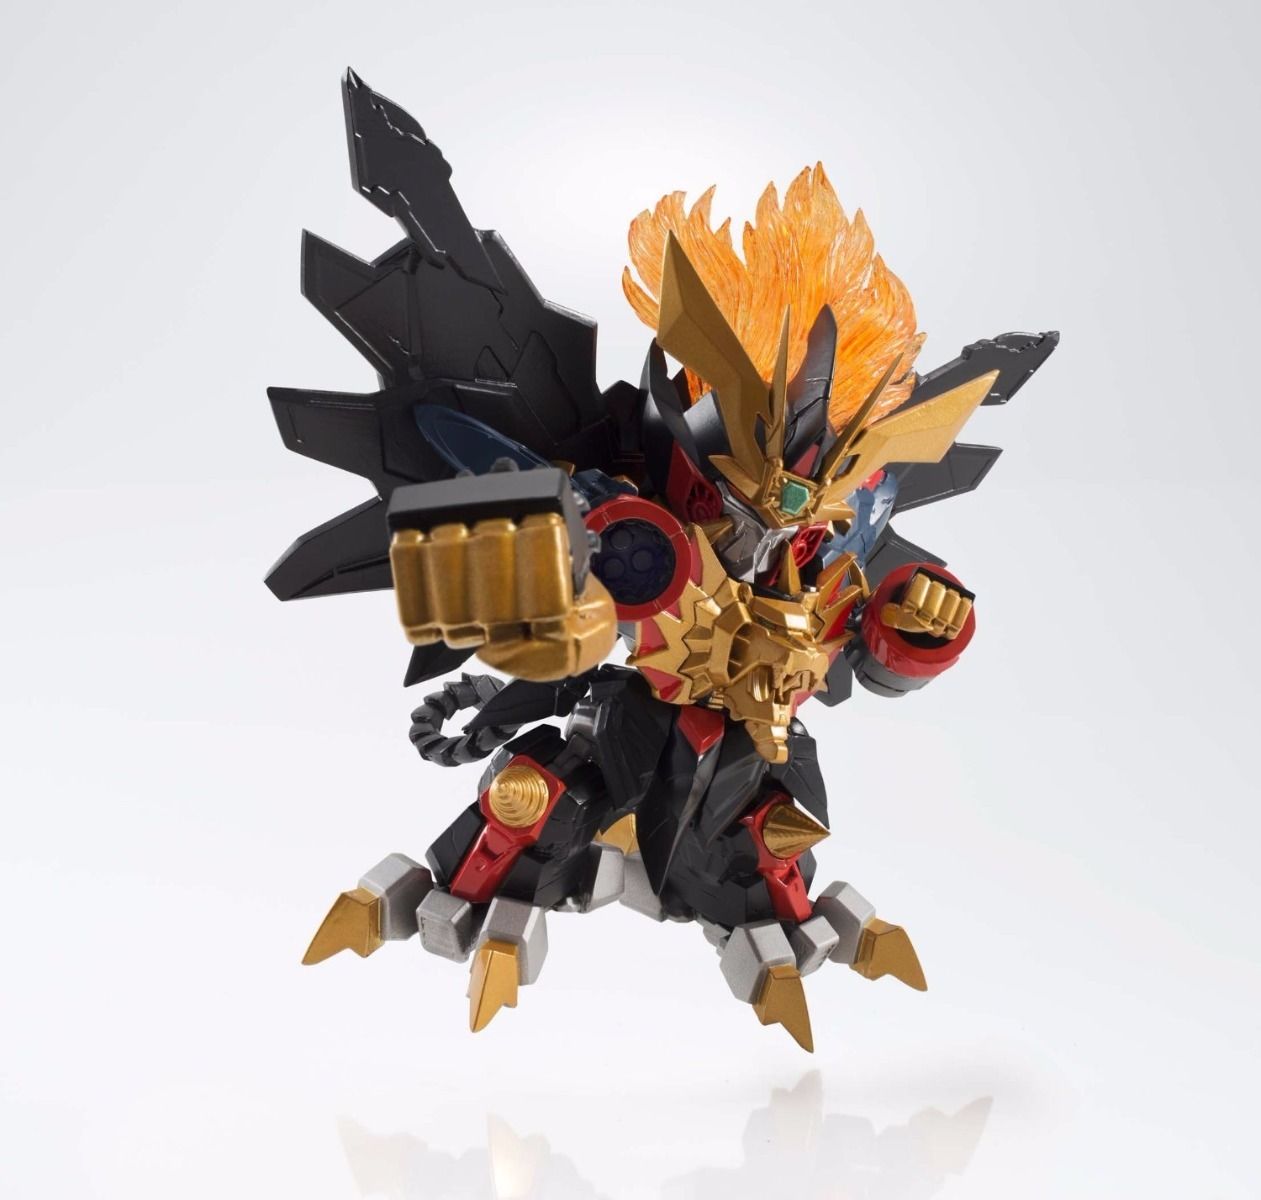 NXEDGE STYLE BRAVE UNIT King of Braves GENESIC GAOGAIGAR Action Figure BANDAI